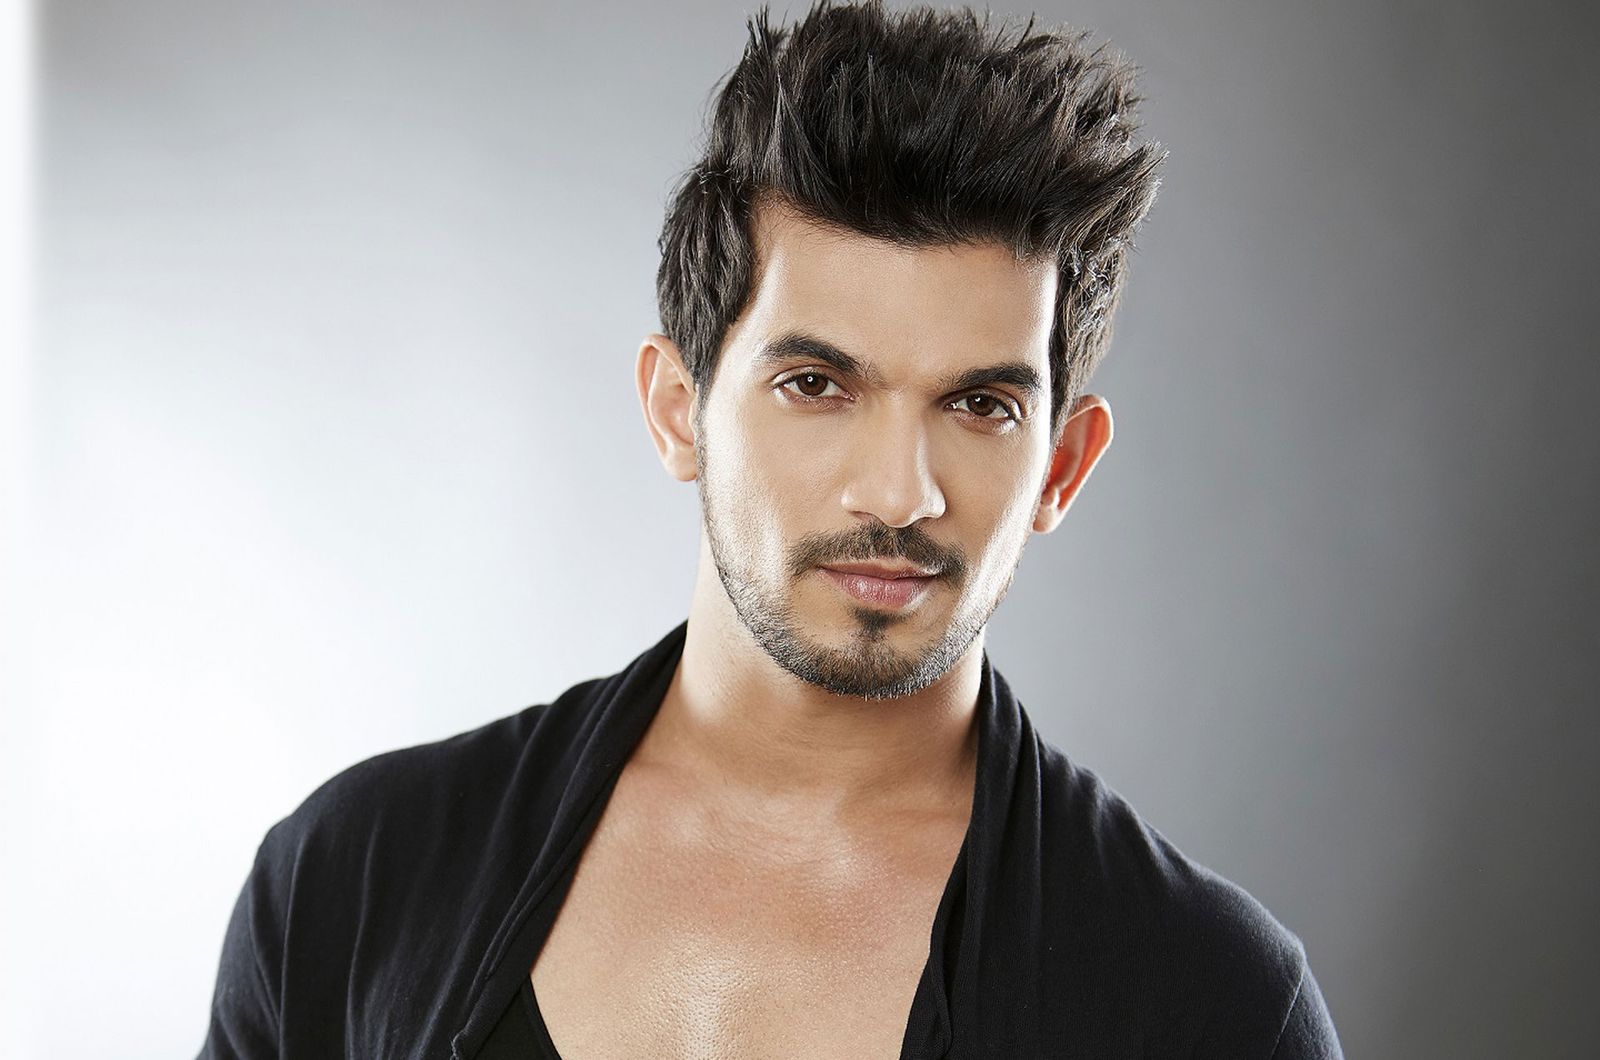 Arjun Bijlani Speaks About Maintaining Mental Well-Being During The Trying Times Of Corona